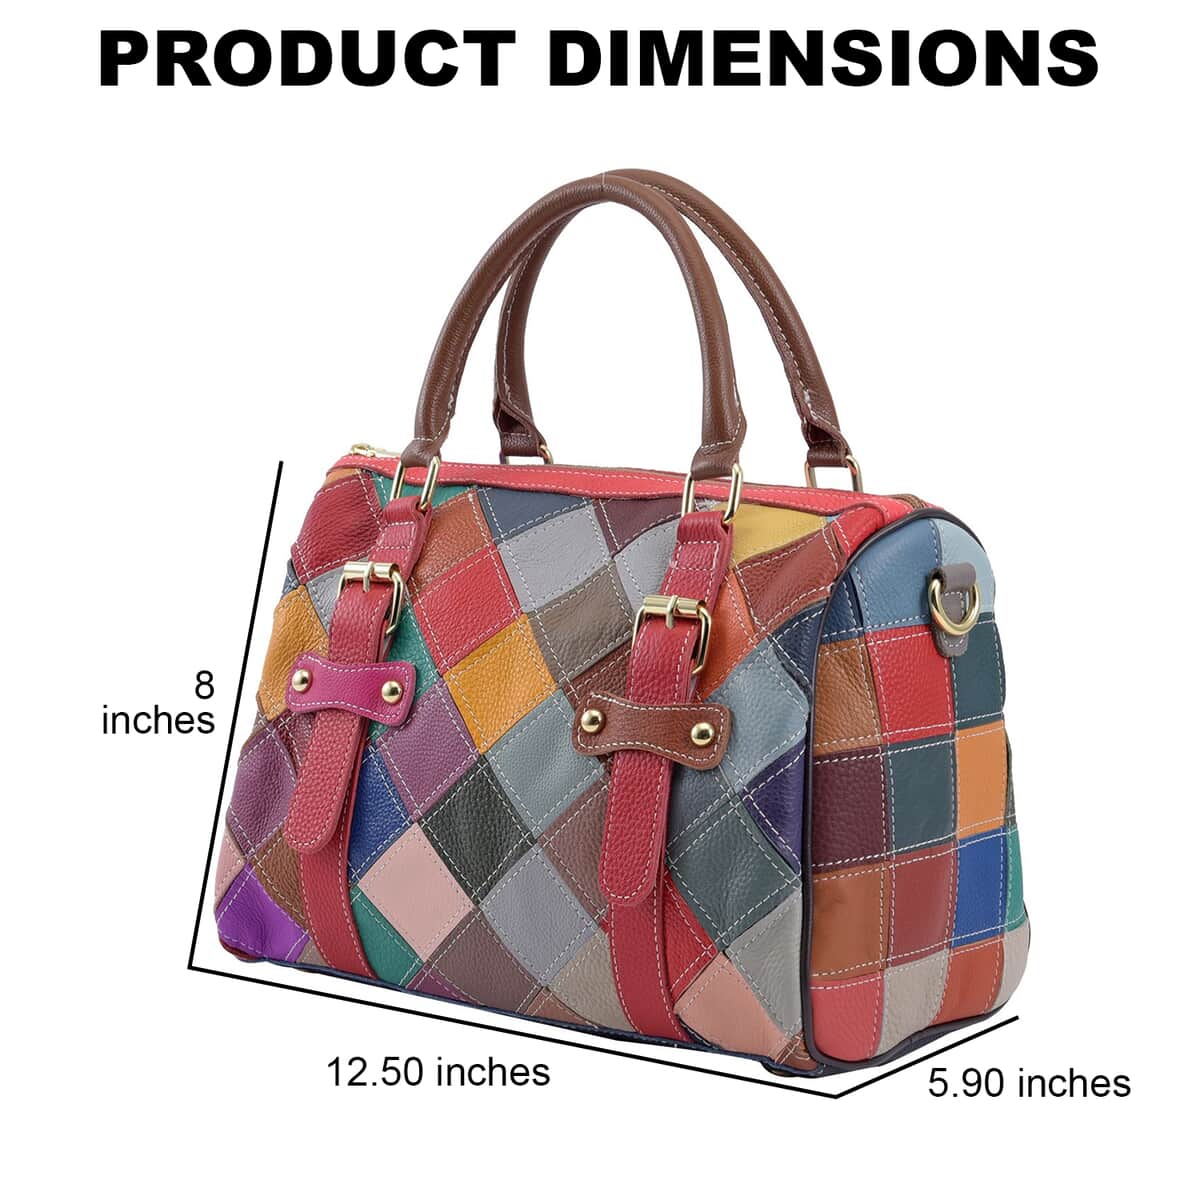 Rainbow Color Genuine Leather Tote Bag (12.5"x6.5"x8") with Handle Drop and Detachable Shoulder Strap image number 3